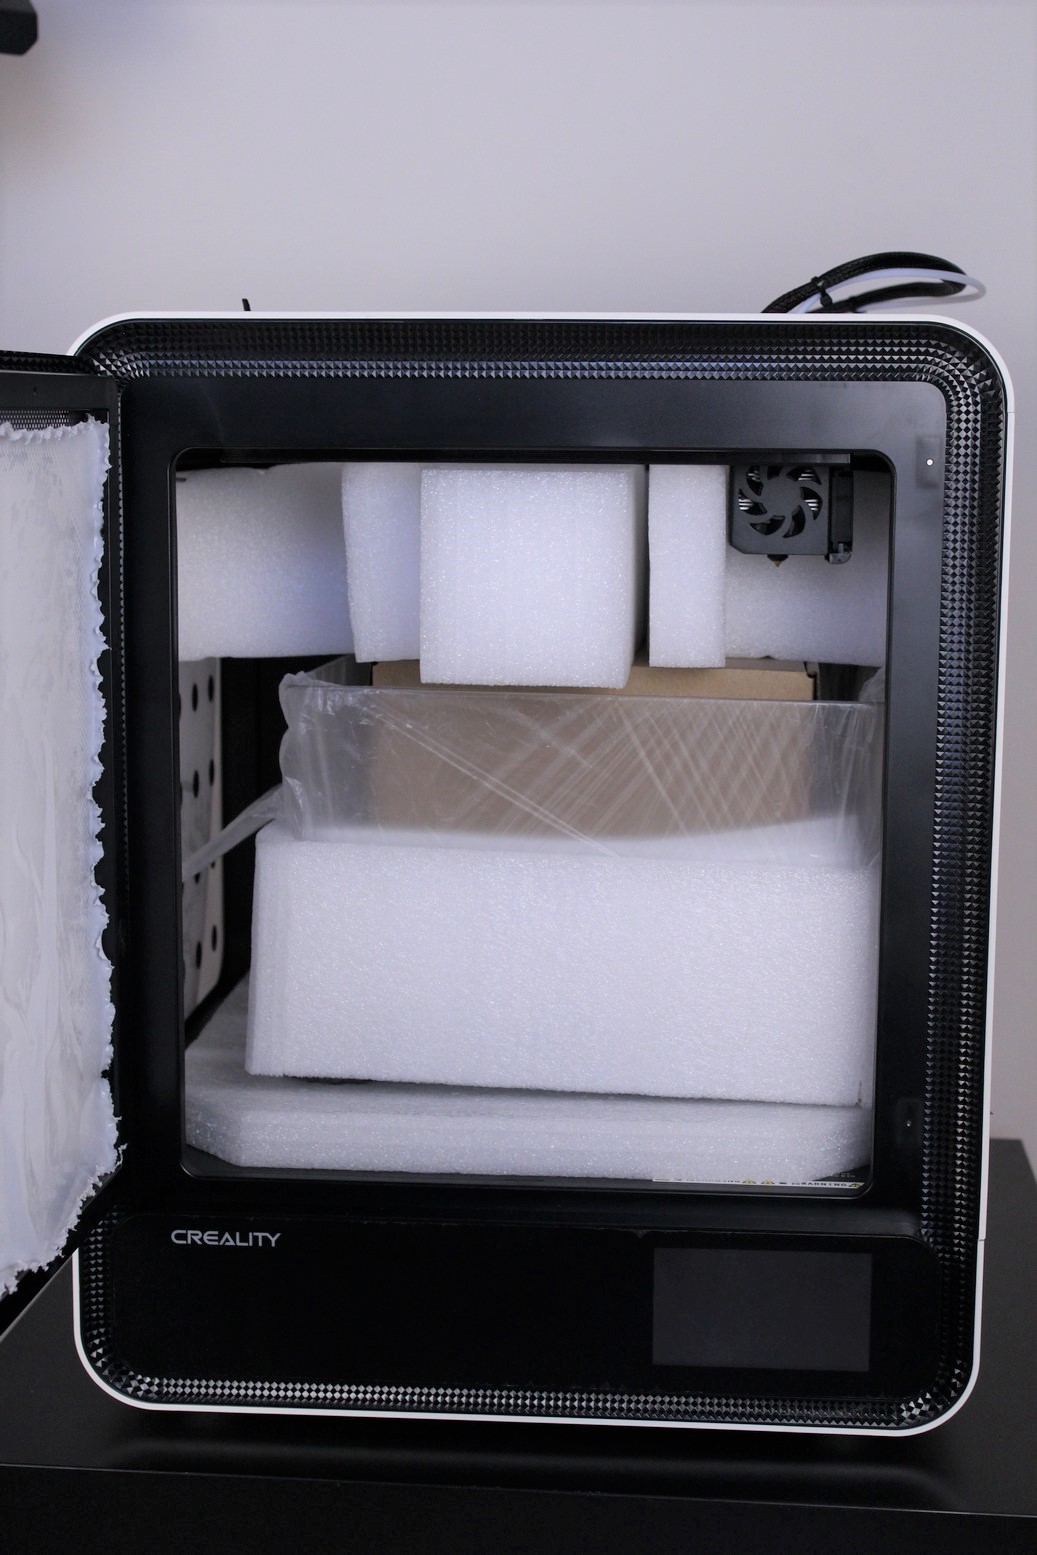 Creality CR 200B Packaging 1 | Creality CR-200B Review: Budget Enclosed 3D Printer